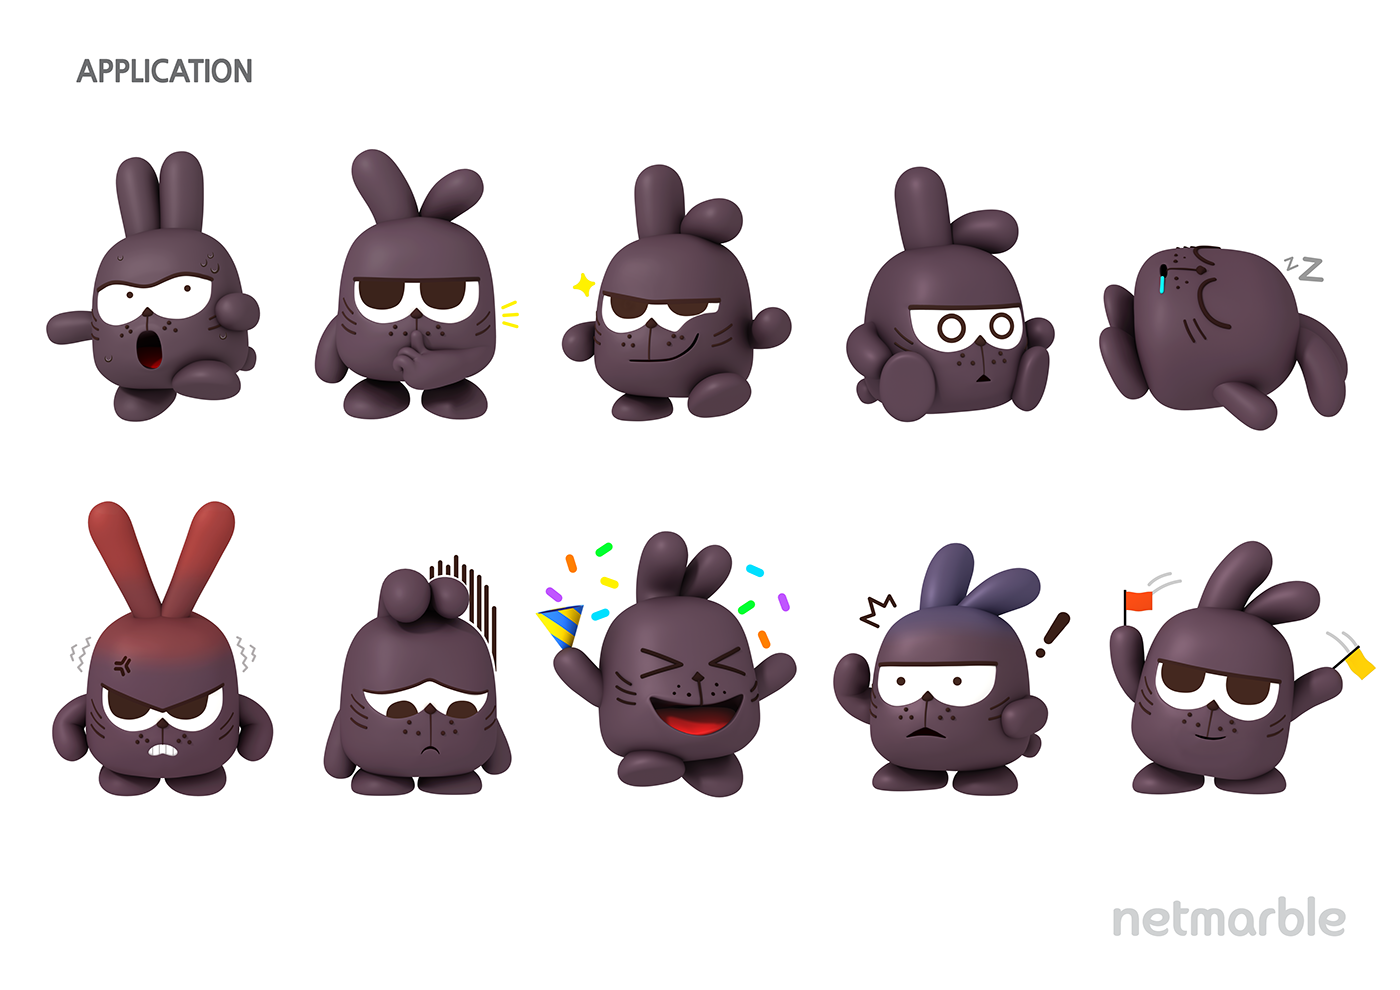 Character Guide 3D manual modeling Netmarble character guide cute